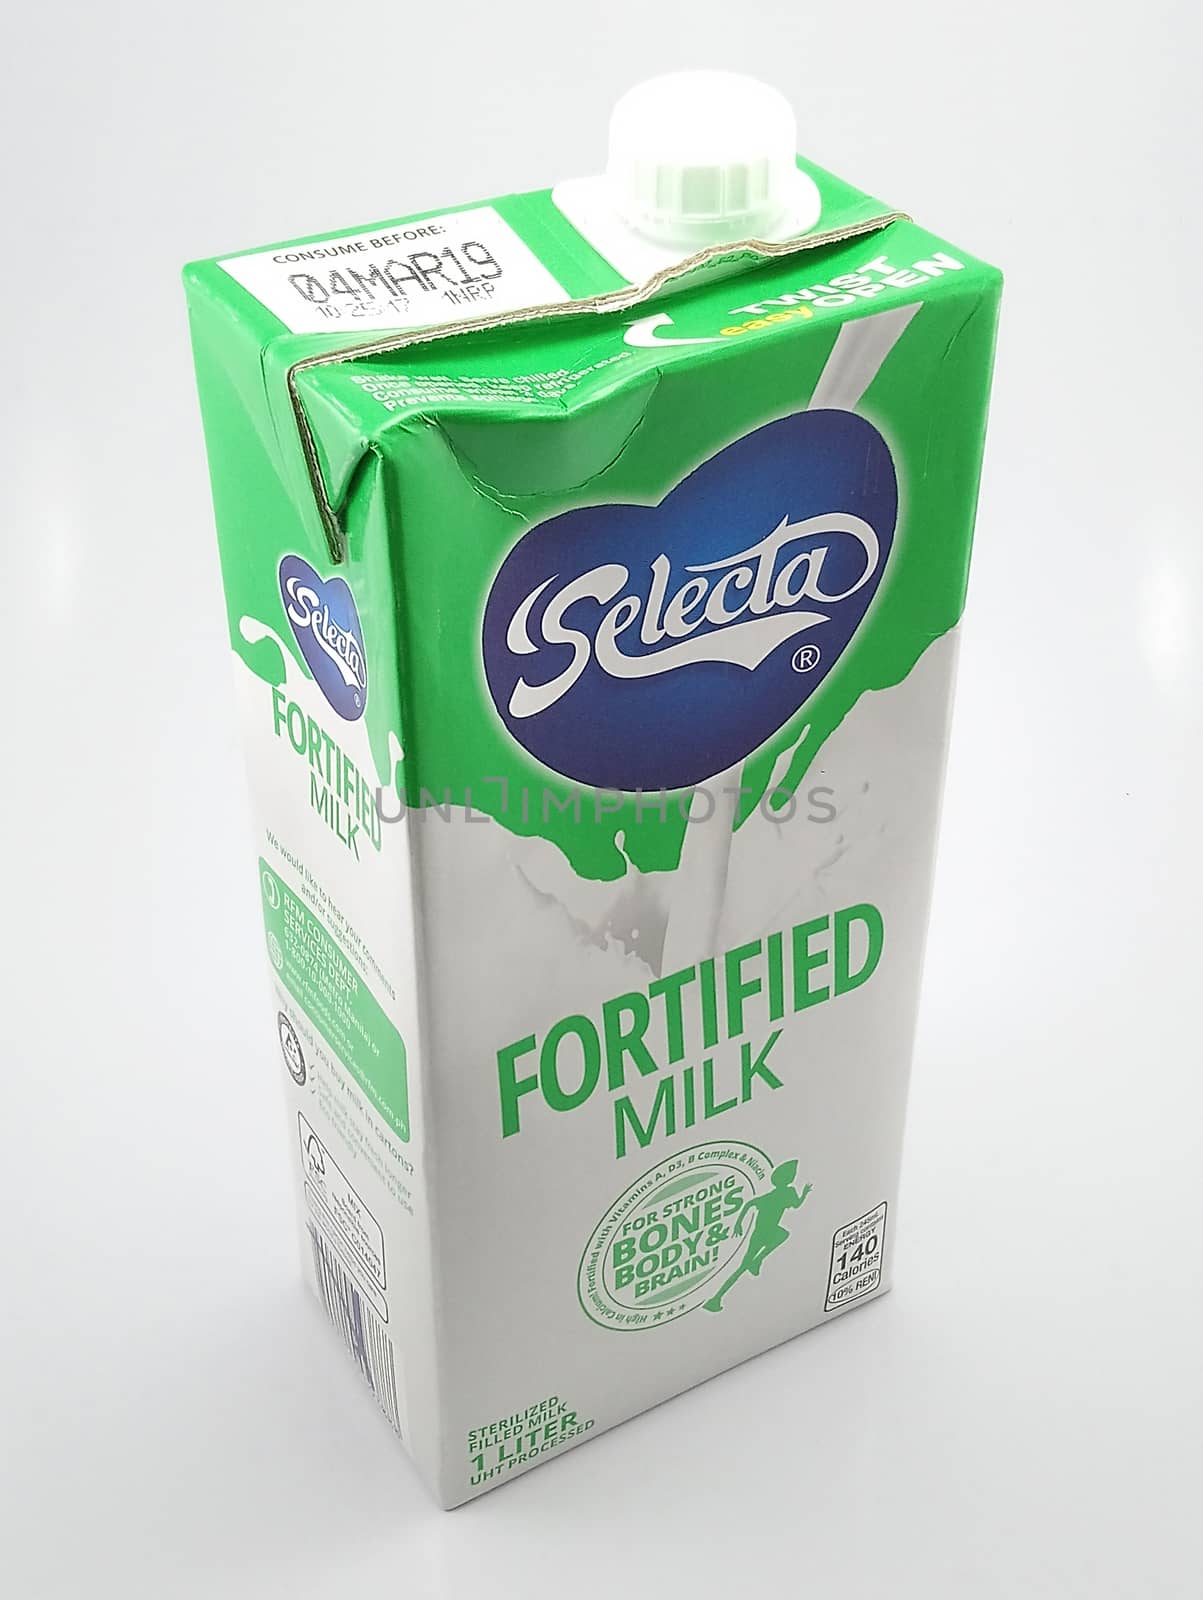 Selecta fortified milk box in Manila, Philippines by imwaltersy